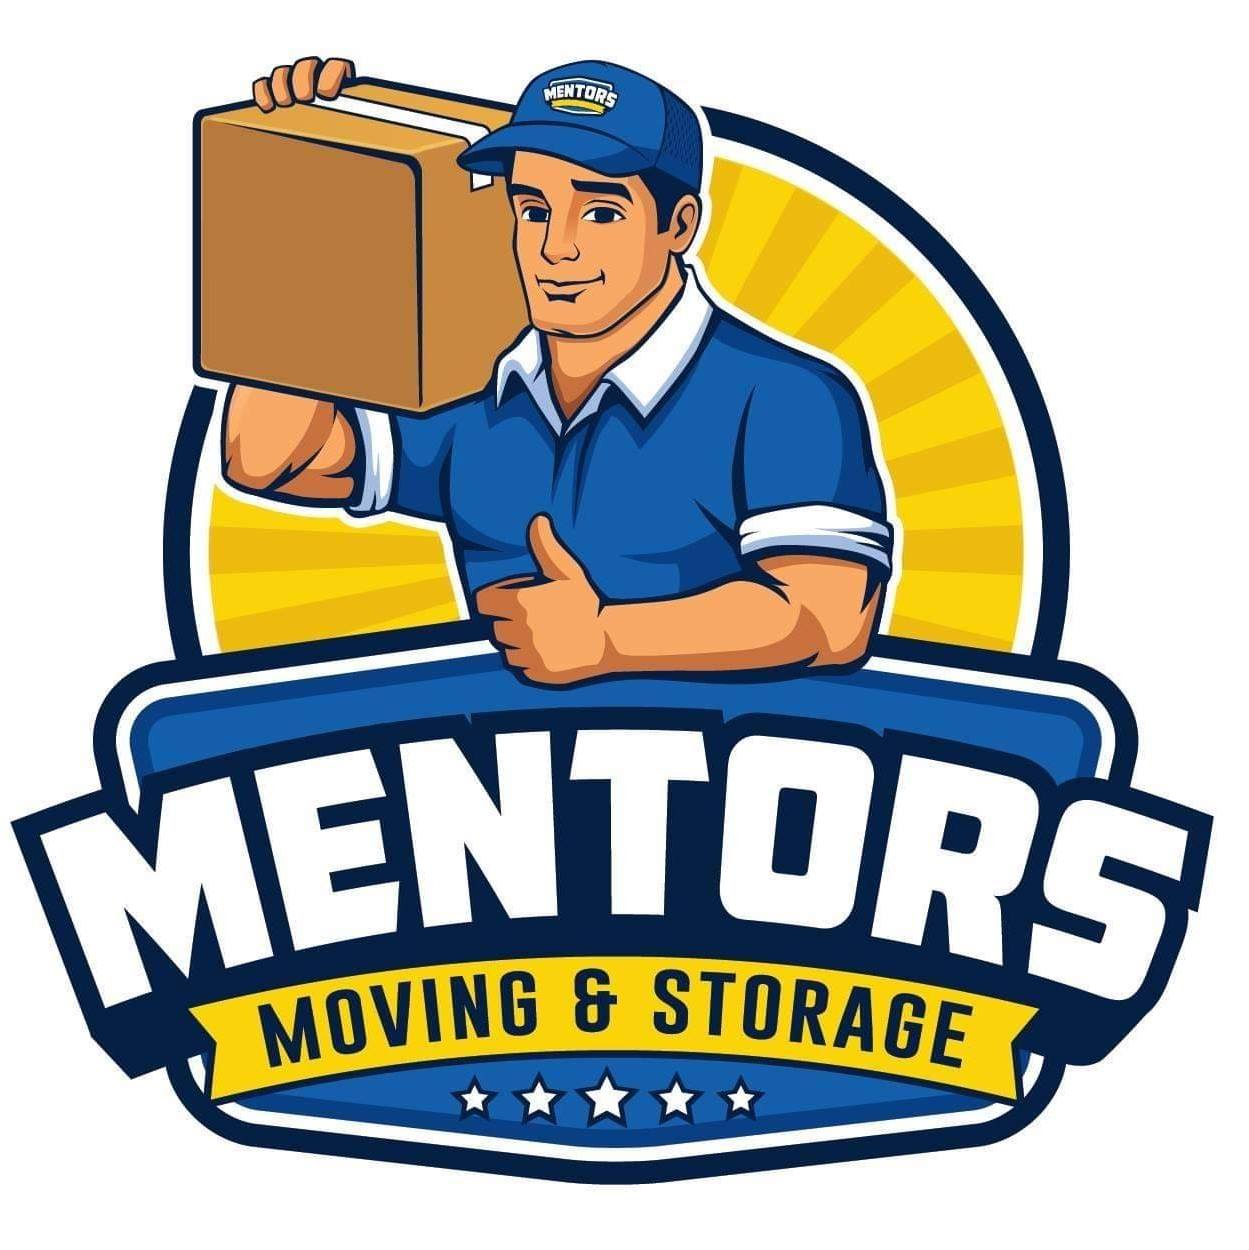 Mentors Moving & Storage Packing and Moving in Phoenix